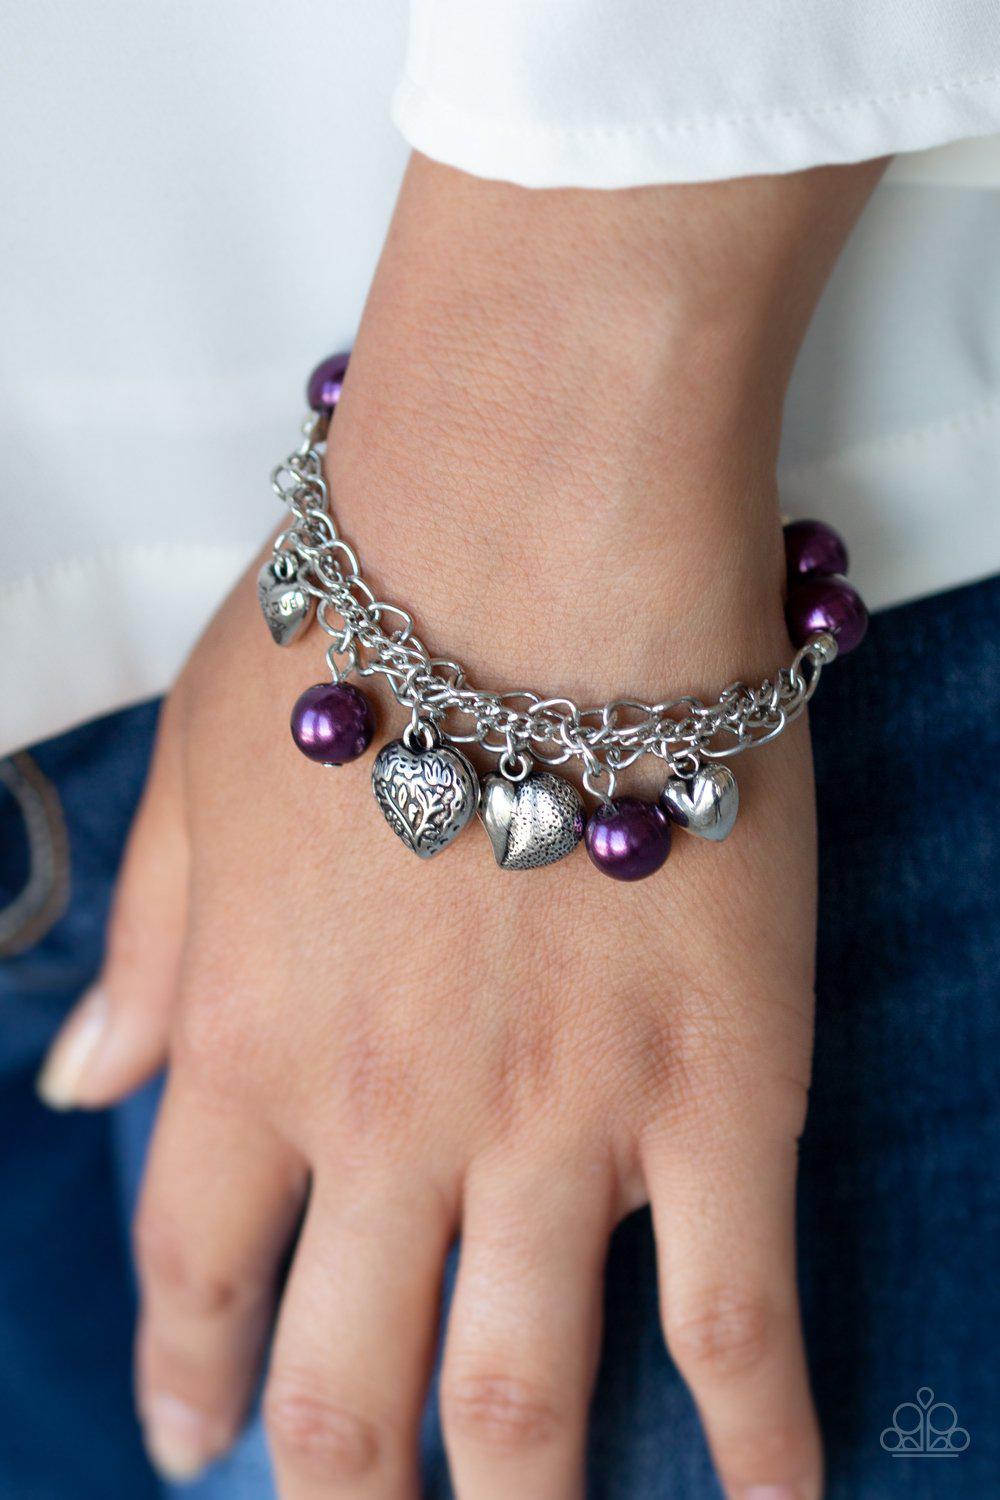 More Amour Purple and Silver Heart Stretch Bracelet - Paparazzi Accessories-CarasShop.com - $5 Jewelry by Cara Jewels